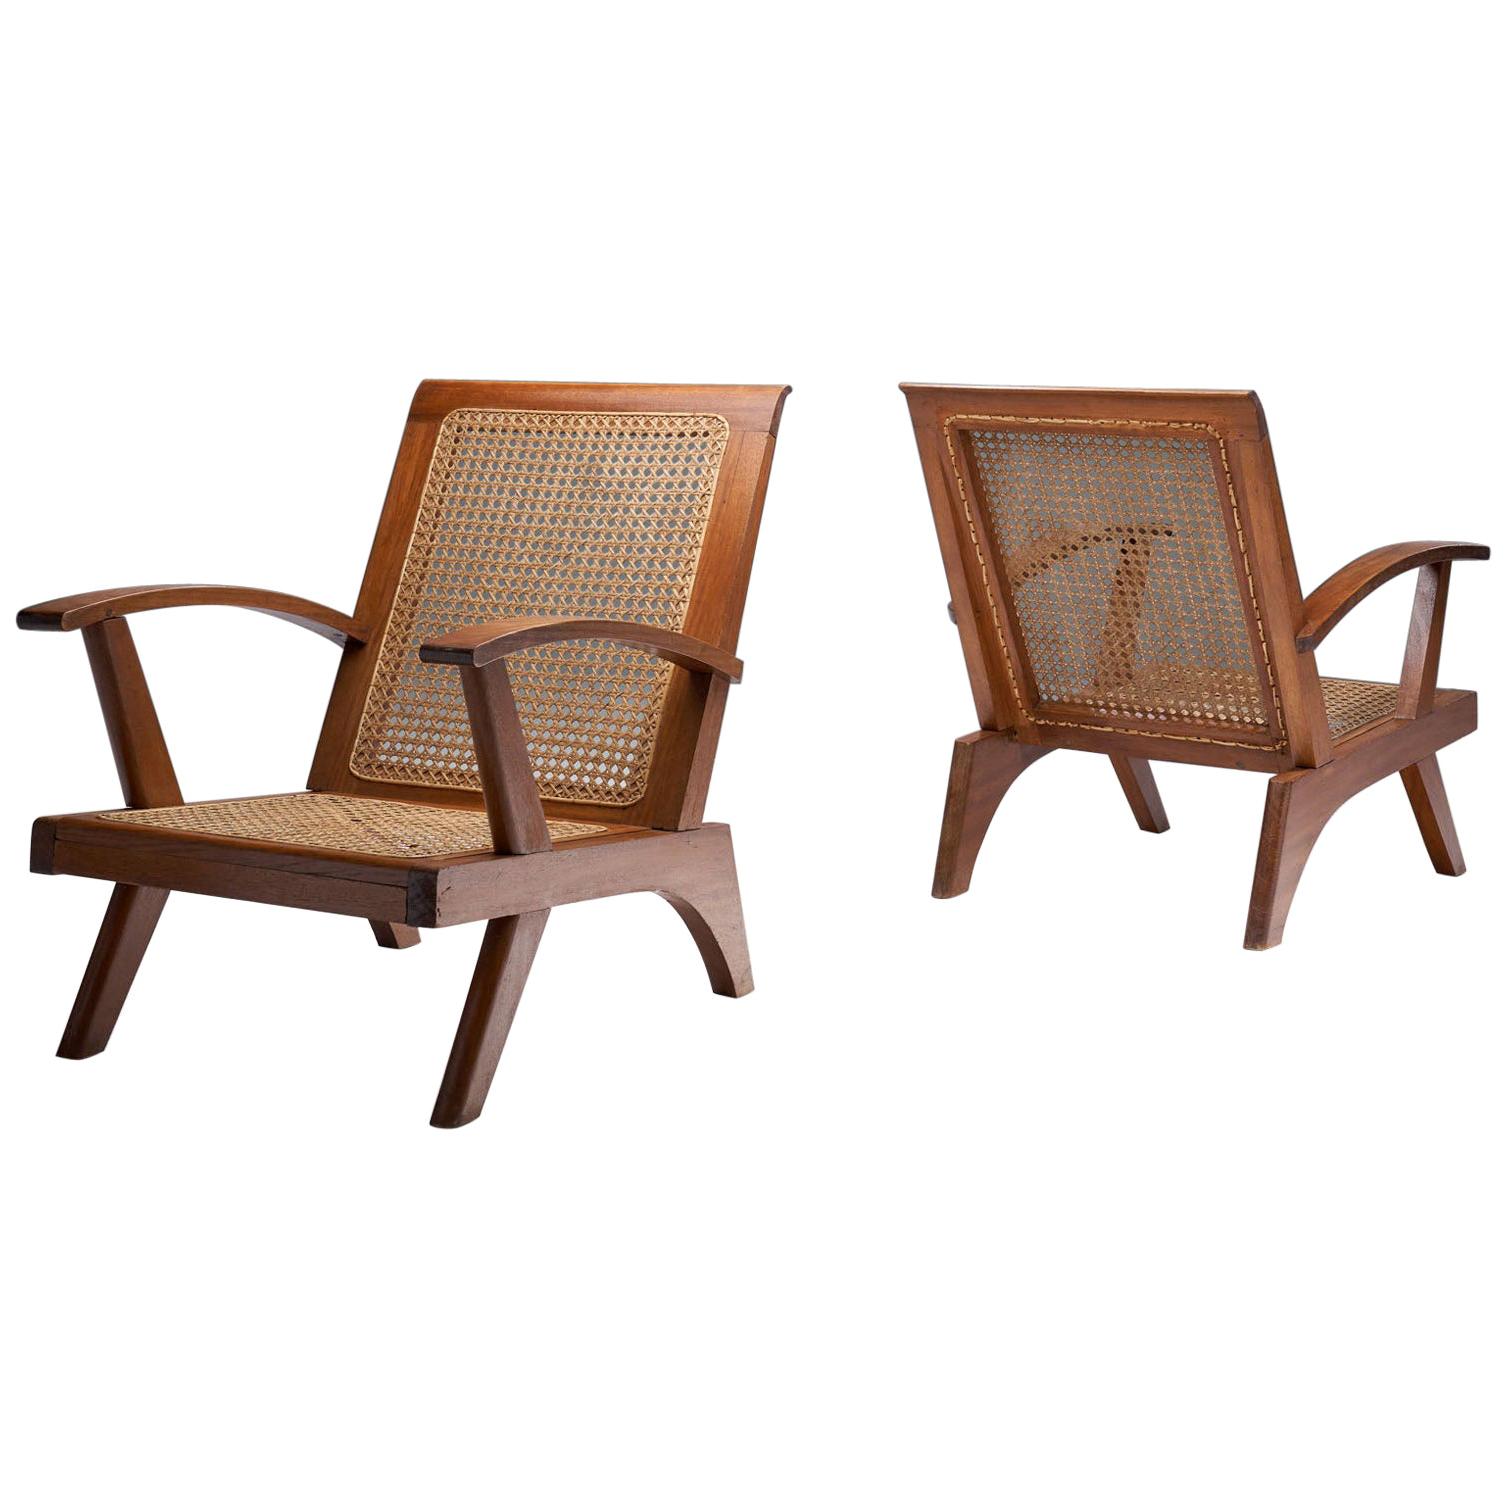 Pair of French Teak Armchairs, France, 1950s